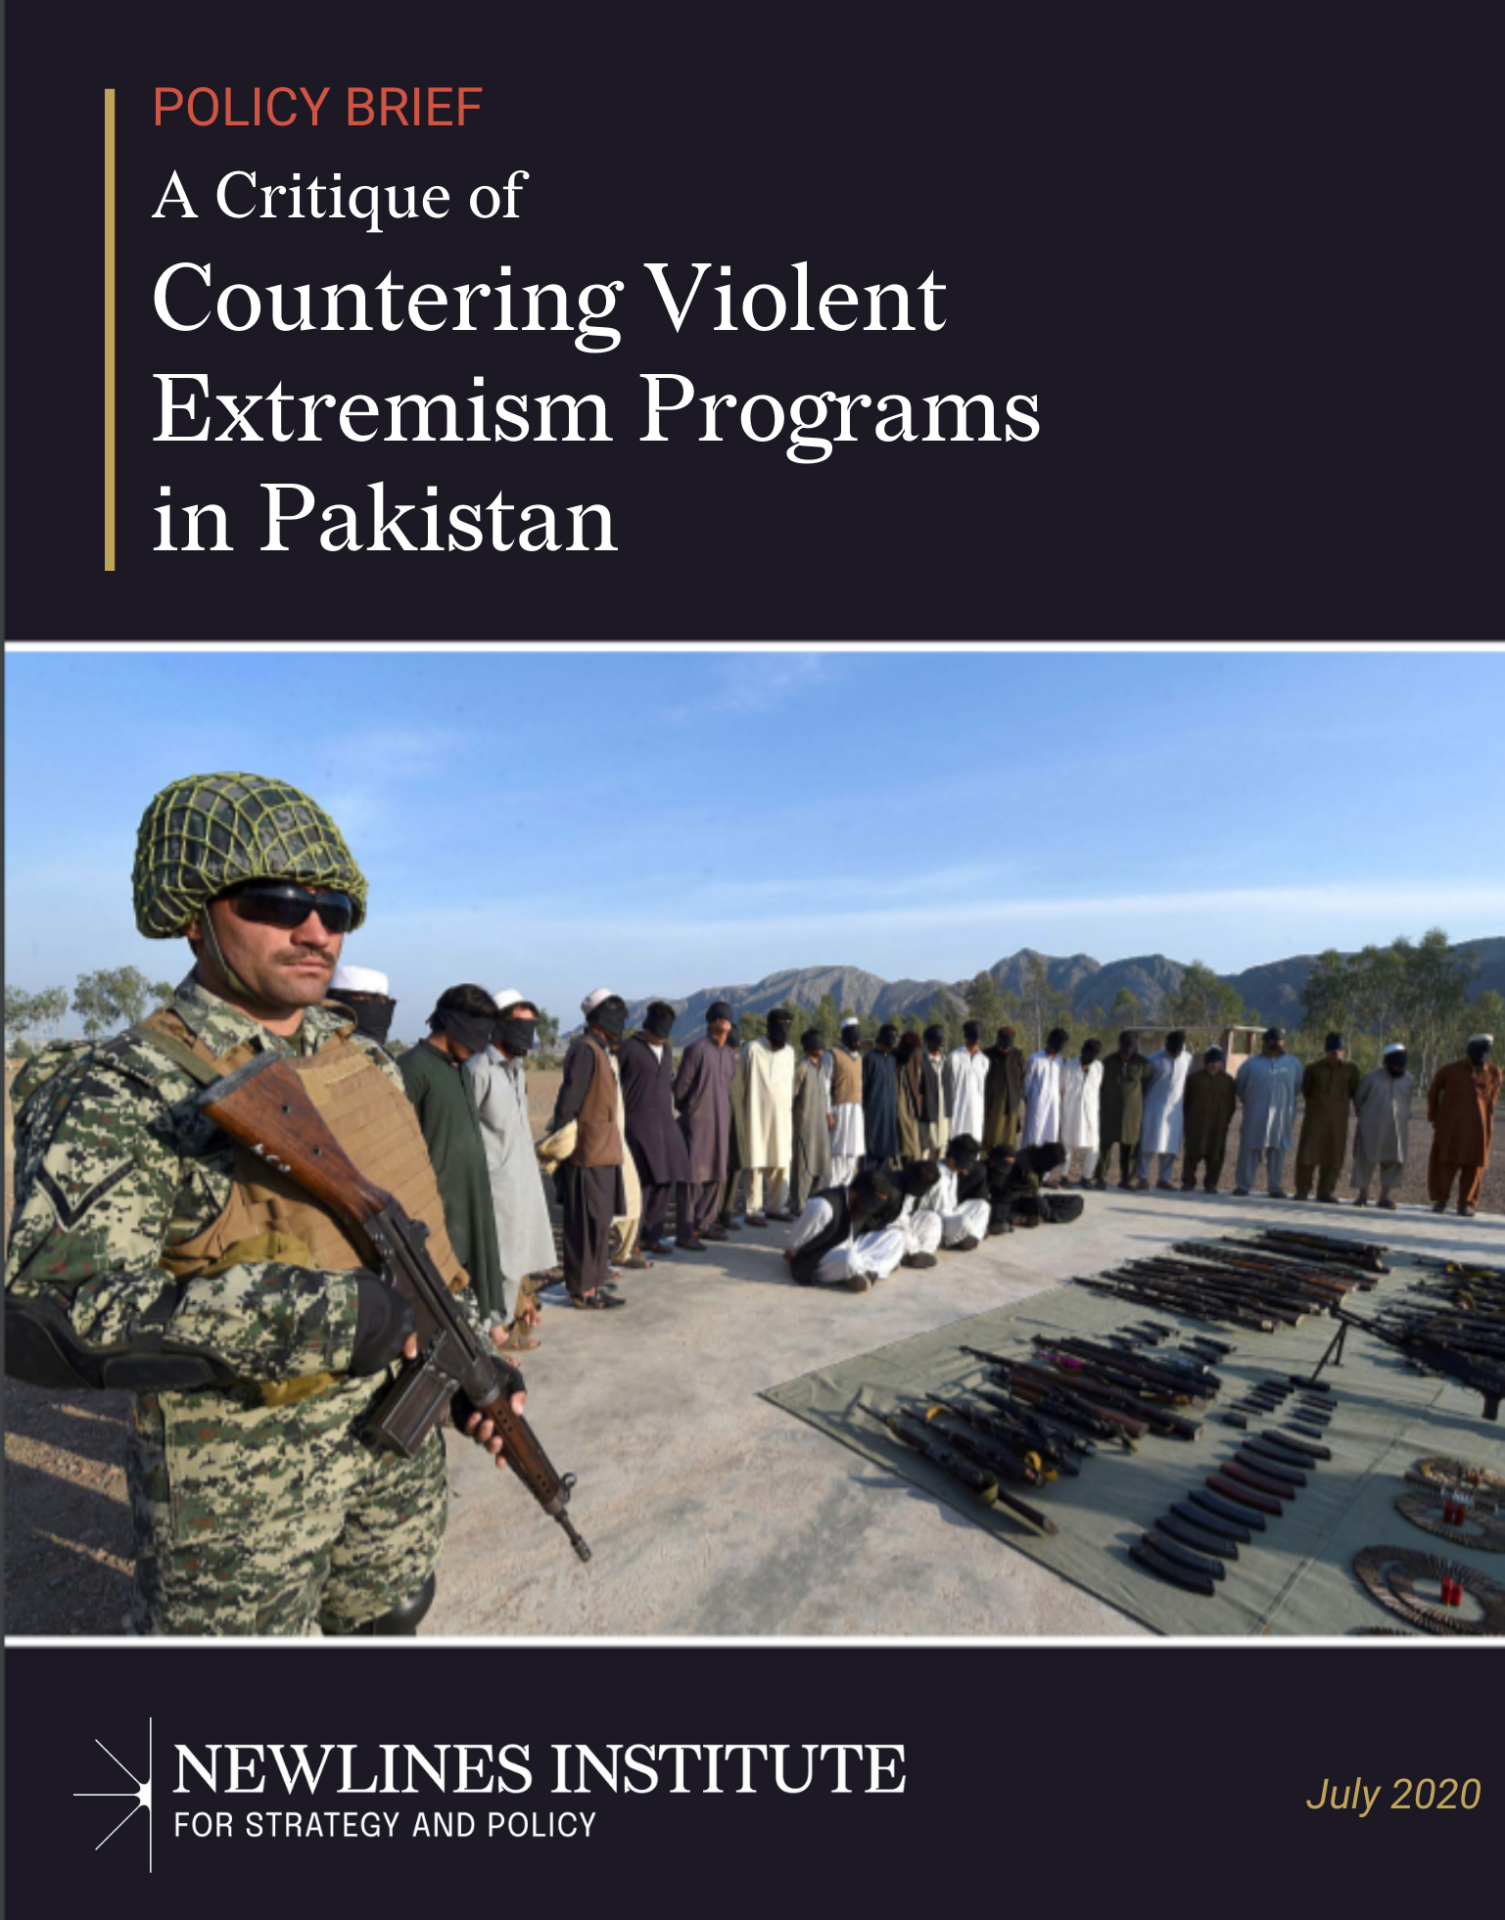 A Critique of Countering Violent Extremism Programs in Pakistan